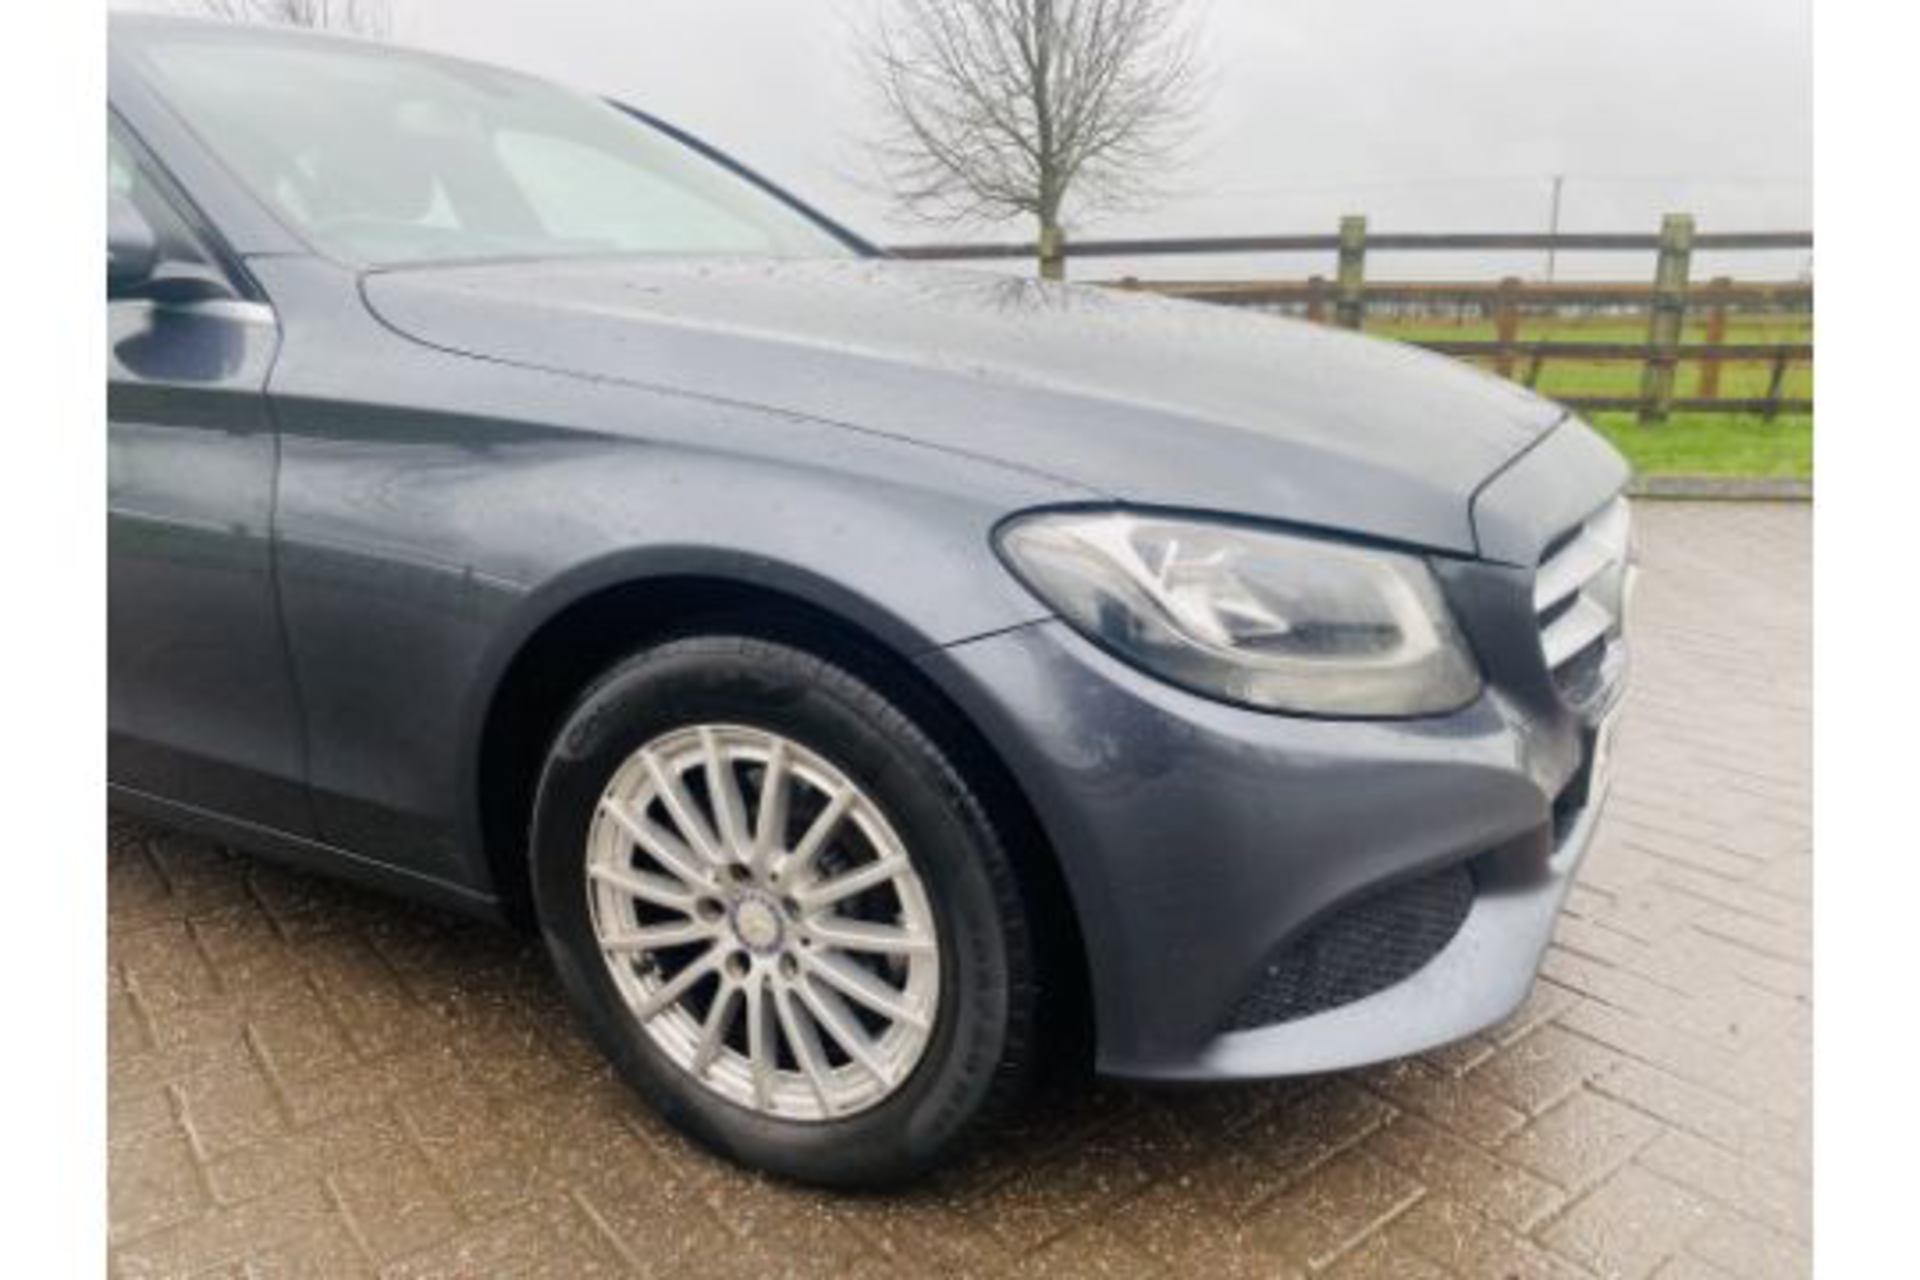 MERCEDES C220d "SPECIAL EQUIPMENT" SE SALOON - 2016 MODEL - LEATHER - NEW SHAPE - AIR CON - NO VAT!! - Image 3 of 26